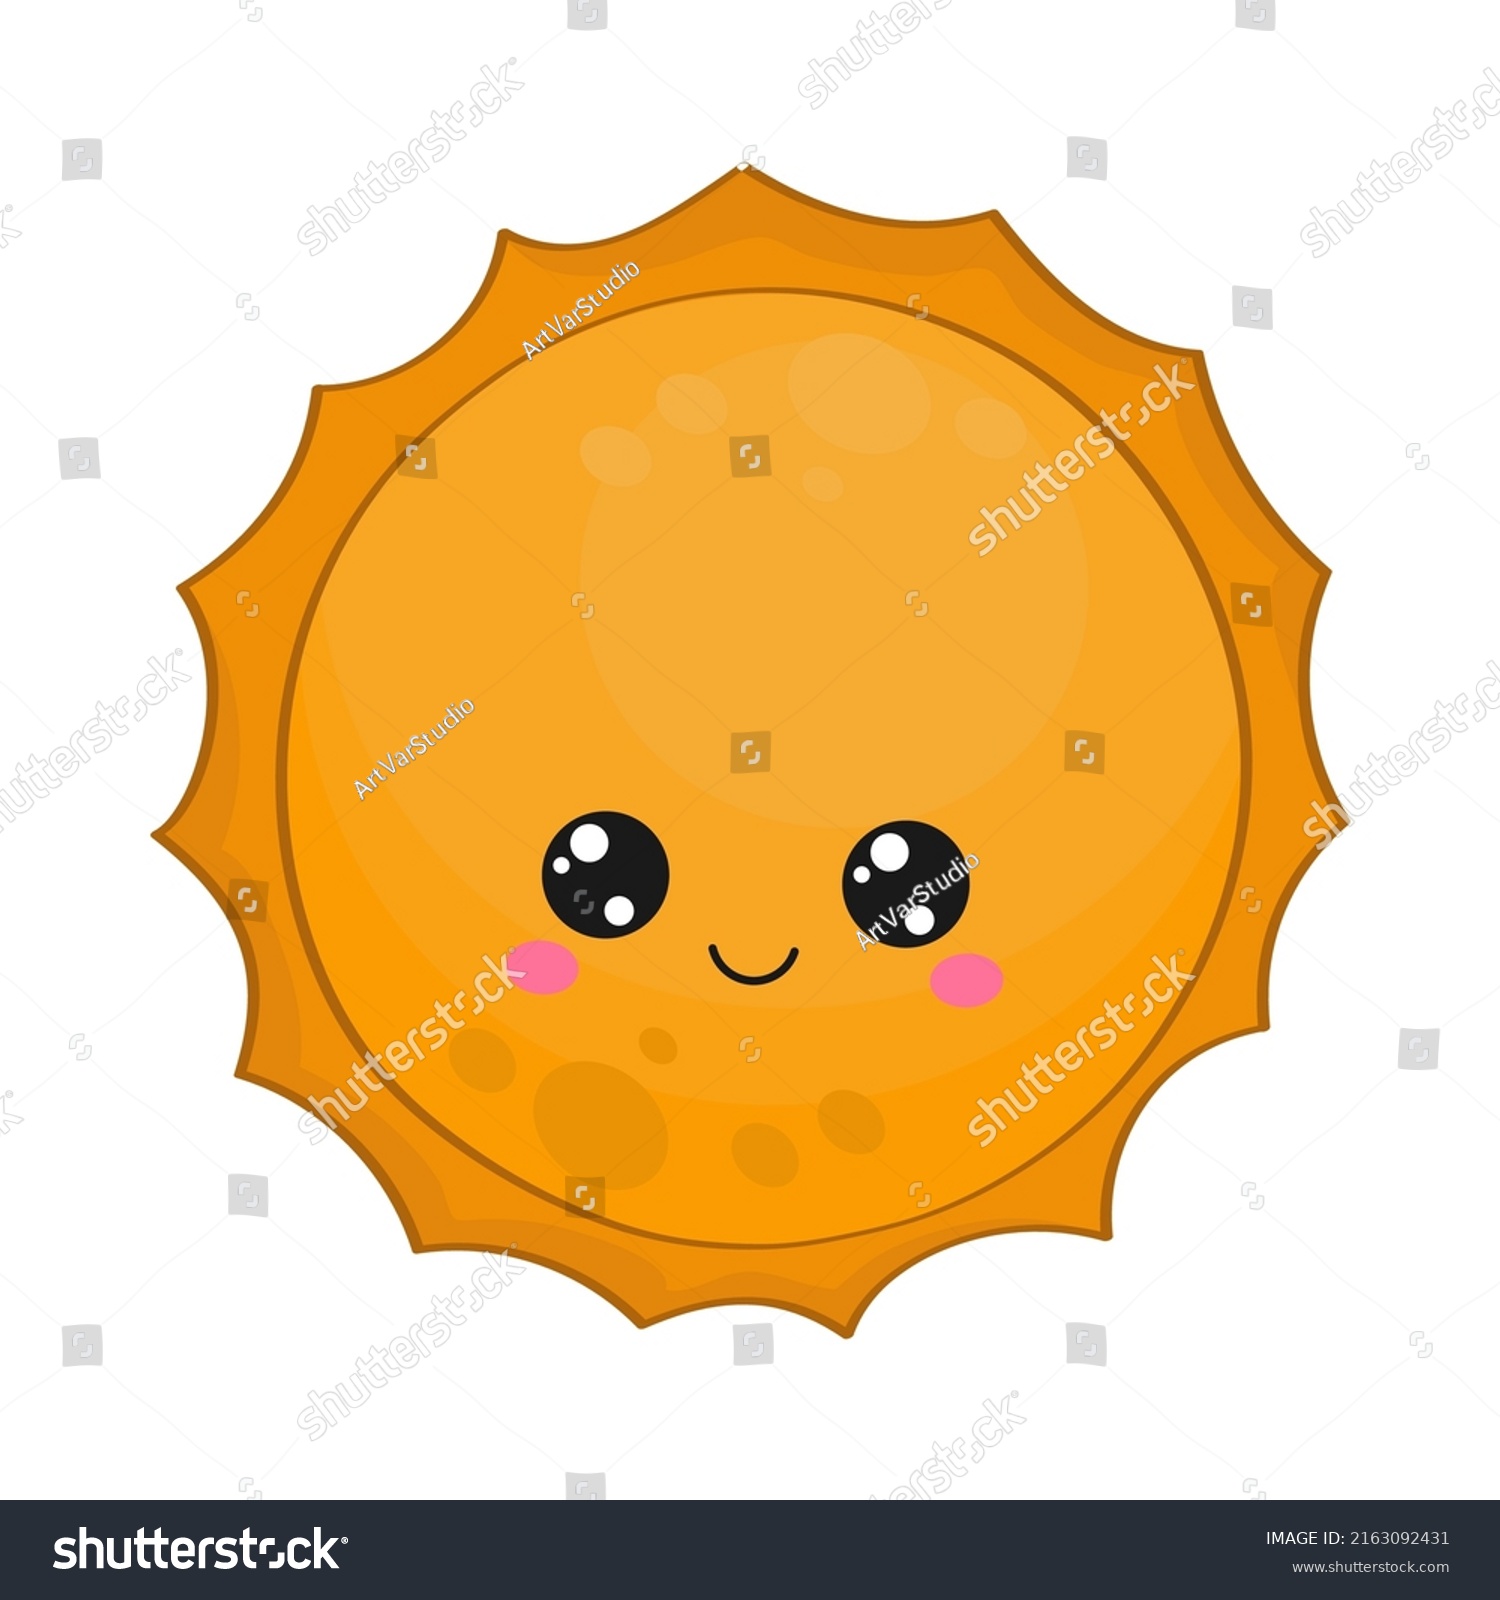 SVG of Cute kawaii Sun Vector illustration of a planet. Picture of planet for kids, baby book, fairy tales, covers, baby shower invitation, textile t-shirt.
 svg